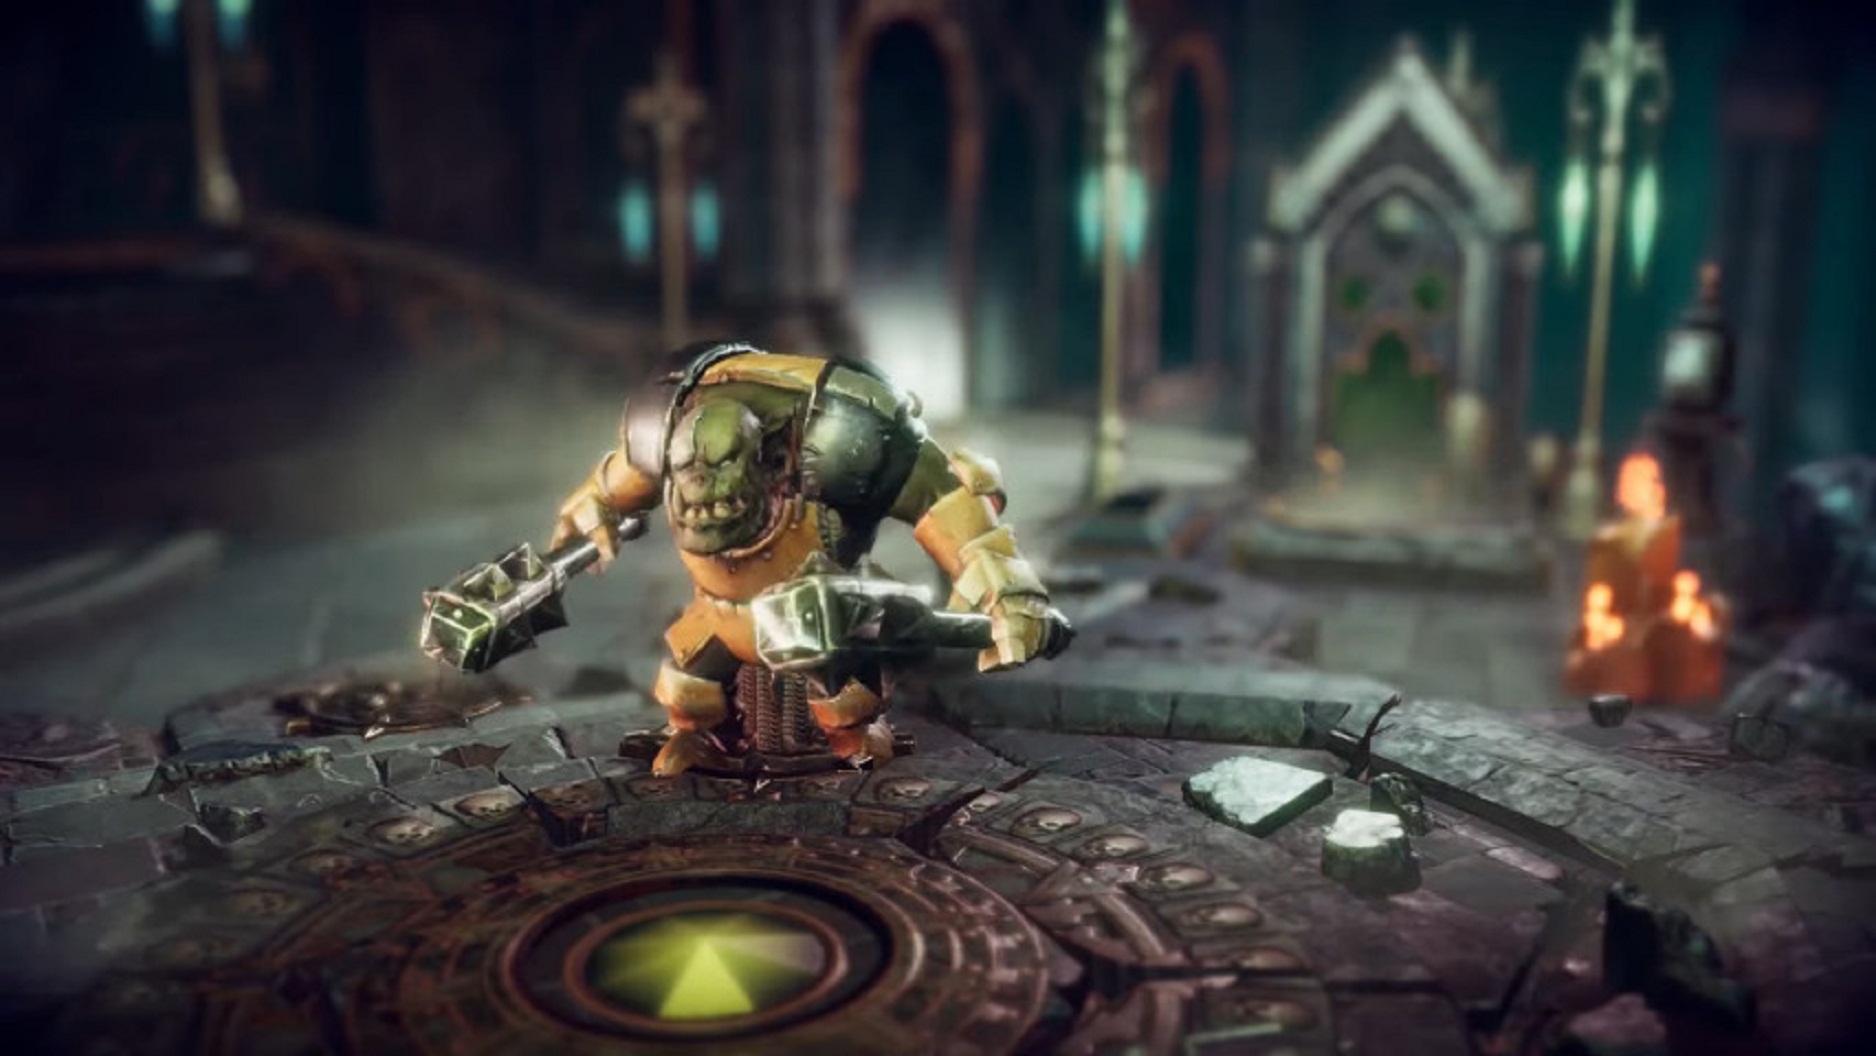 New Game, Warhammer Underworlds: Online, Now Has A Trailer And Is Set To Come Out As An Early Access Title In 2020